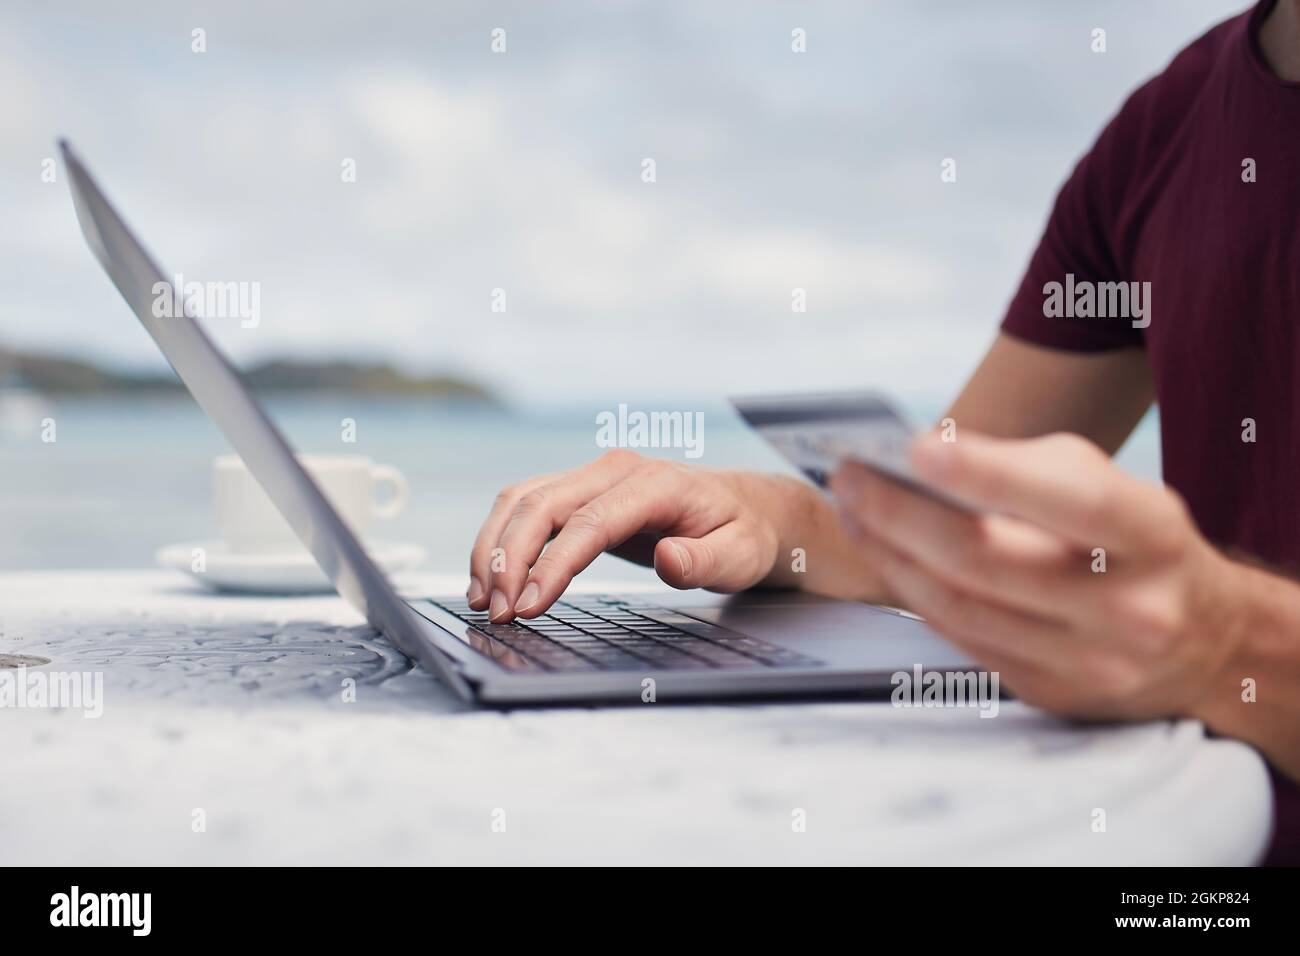 Man sitting on beach against sea and using credit card for online reservation or shopping via laptop. Stock Photo